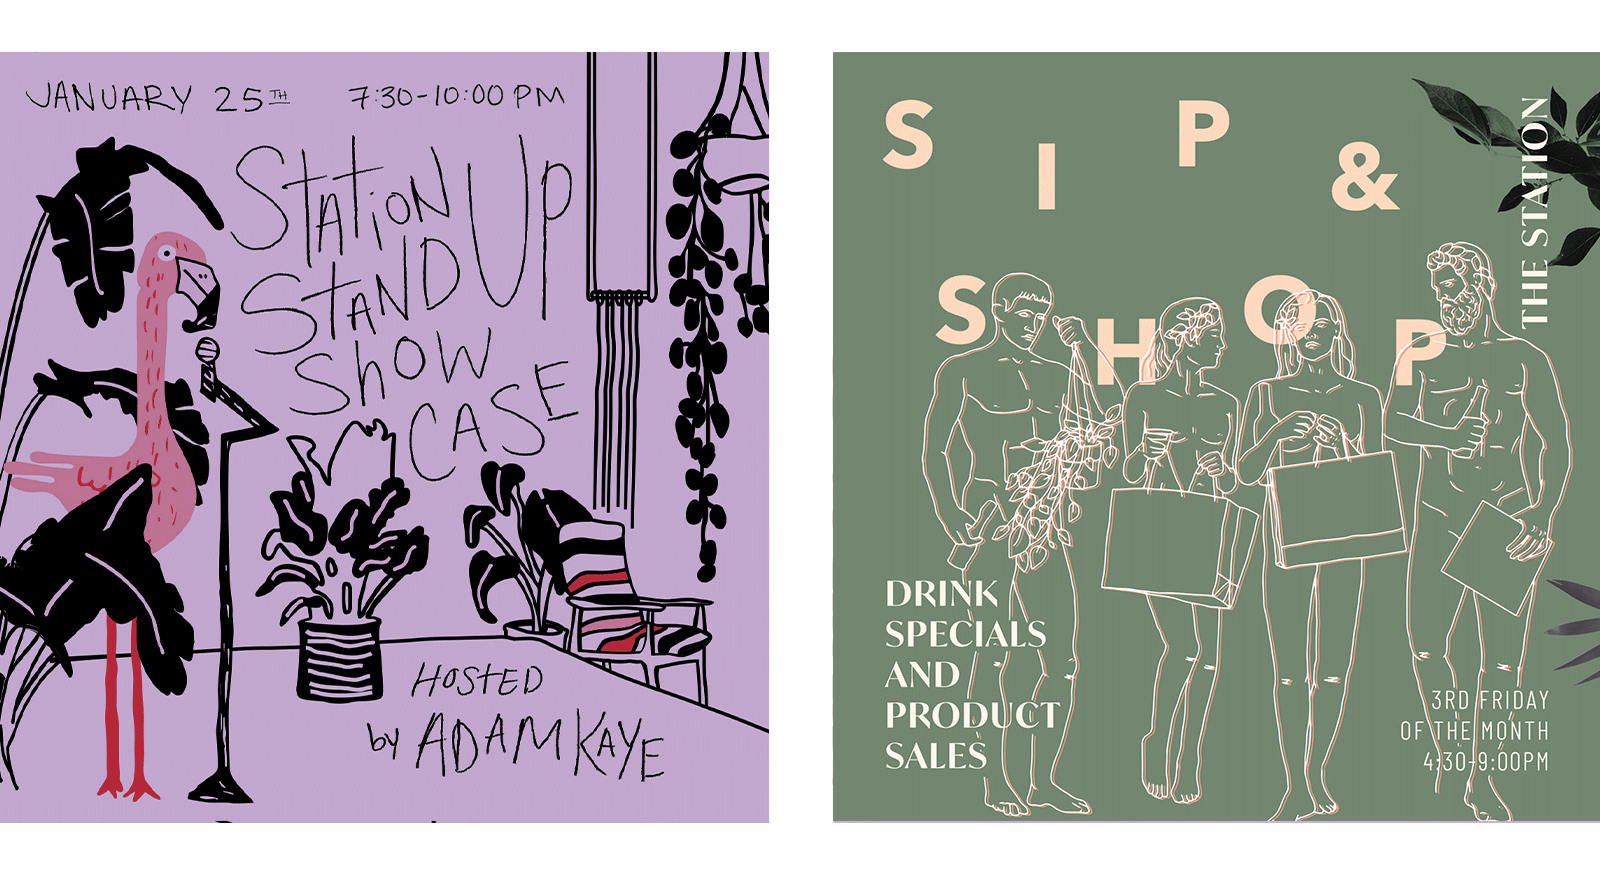 IG graphics created for The Station for Stand Up Showcase, and their sip & shop event. Left graphic is an illustration of a flamingo on their stage. Right graphic includes illustrations of sculpture models carrying shopping bags.